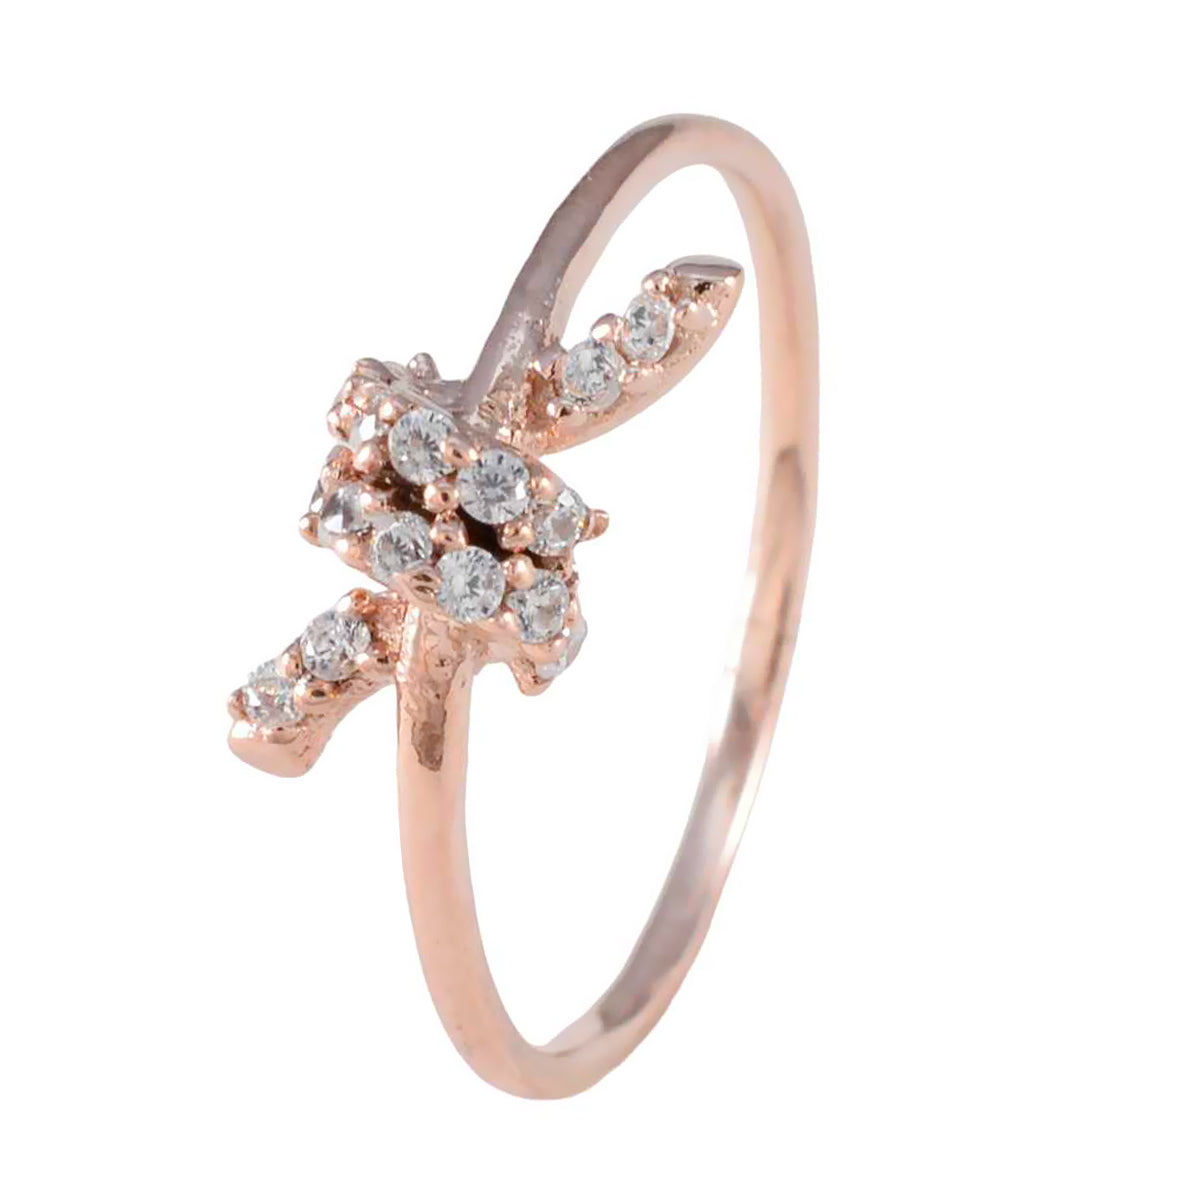 Riyo Superb Silver Ring With Rose Gold Plating White CZ Stone Round Shape Prong Setting Custom Jewelry Cocktail Ring